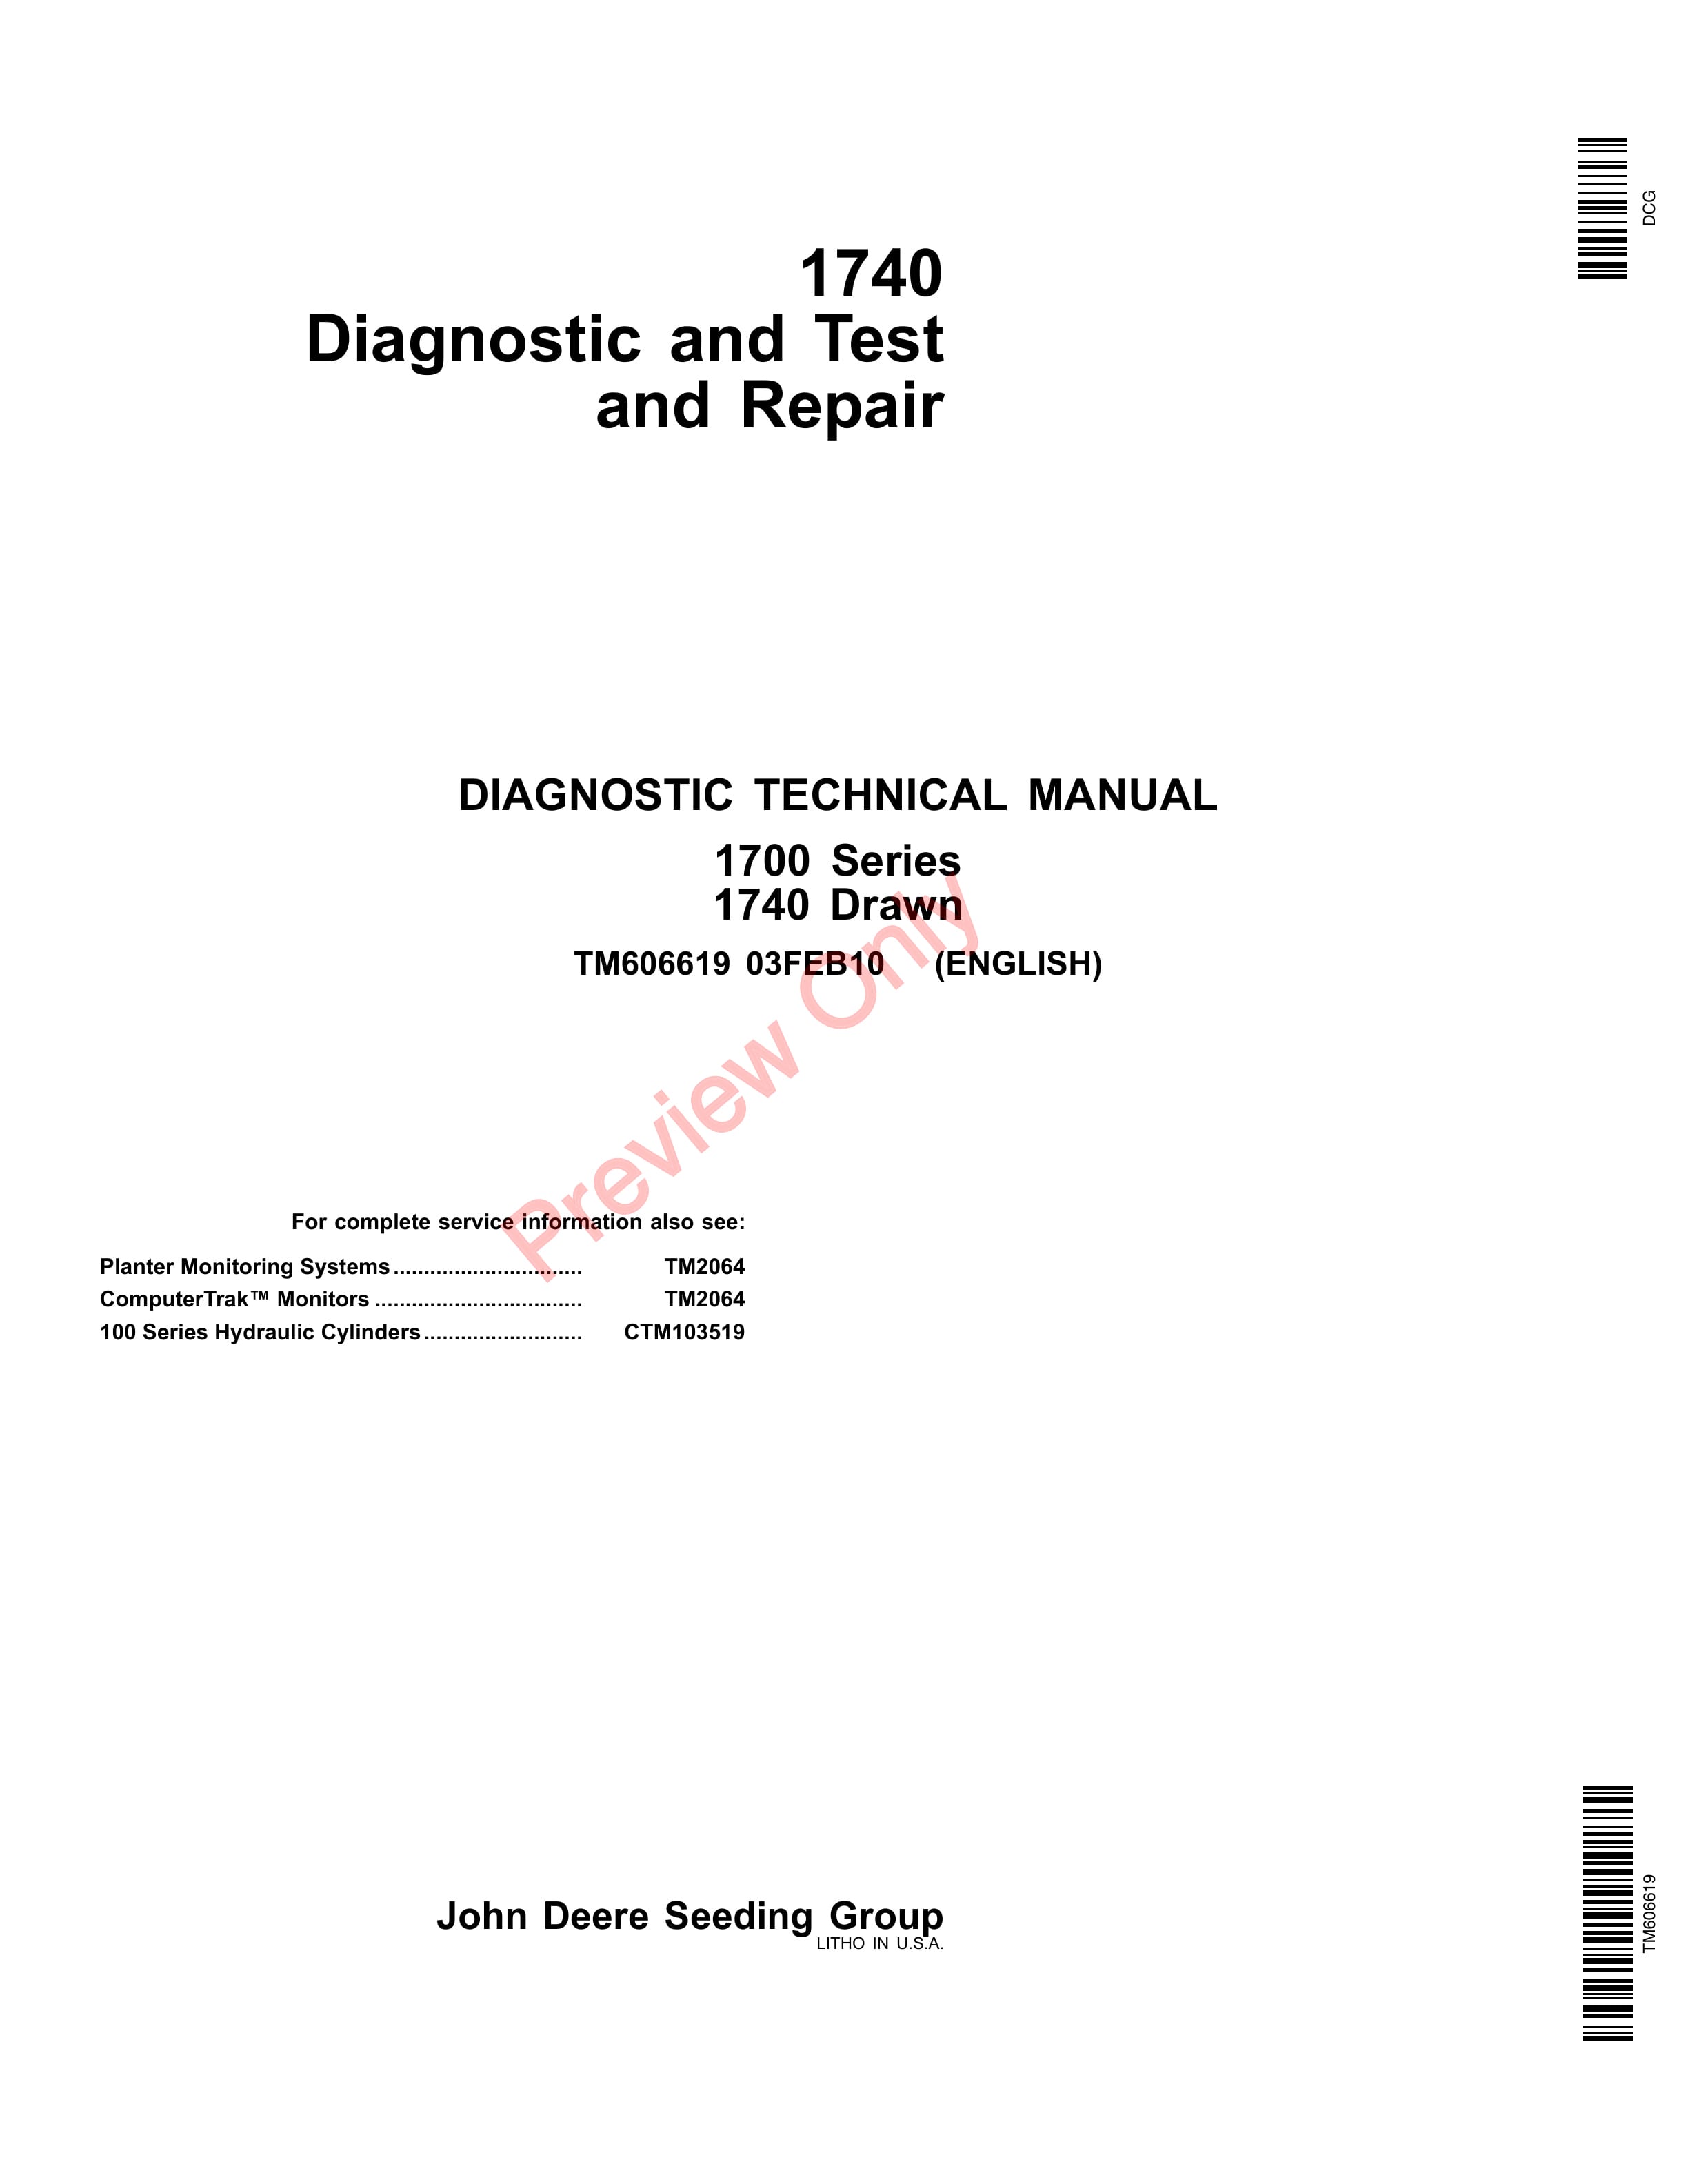 John Deere 1740 and Test and 1700 Series 1740 Drawn Planting and Seeding Technical Manual TM606619 03FEB10 1